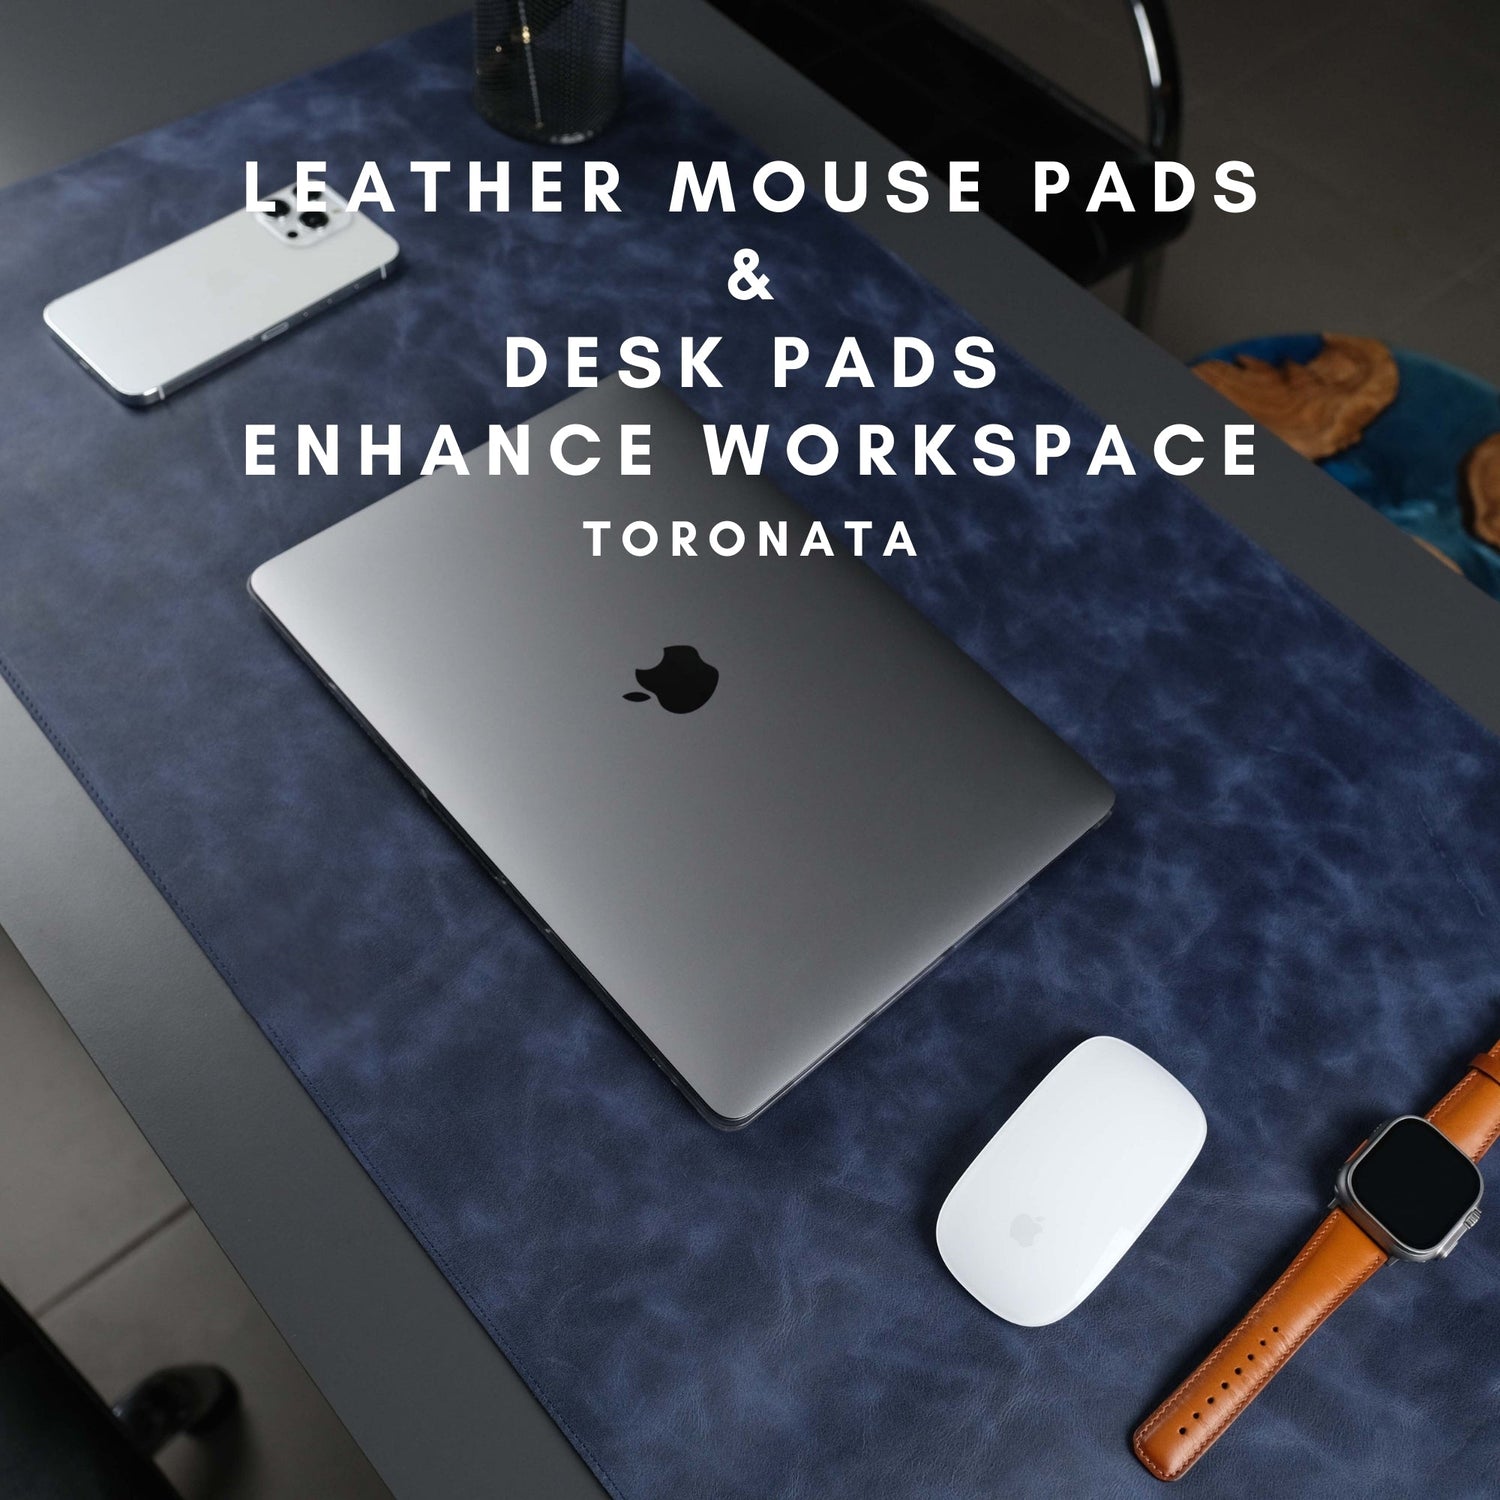 Leather Mouse Pads and Desk Pads Enhance Workspace - TORONATA